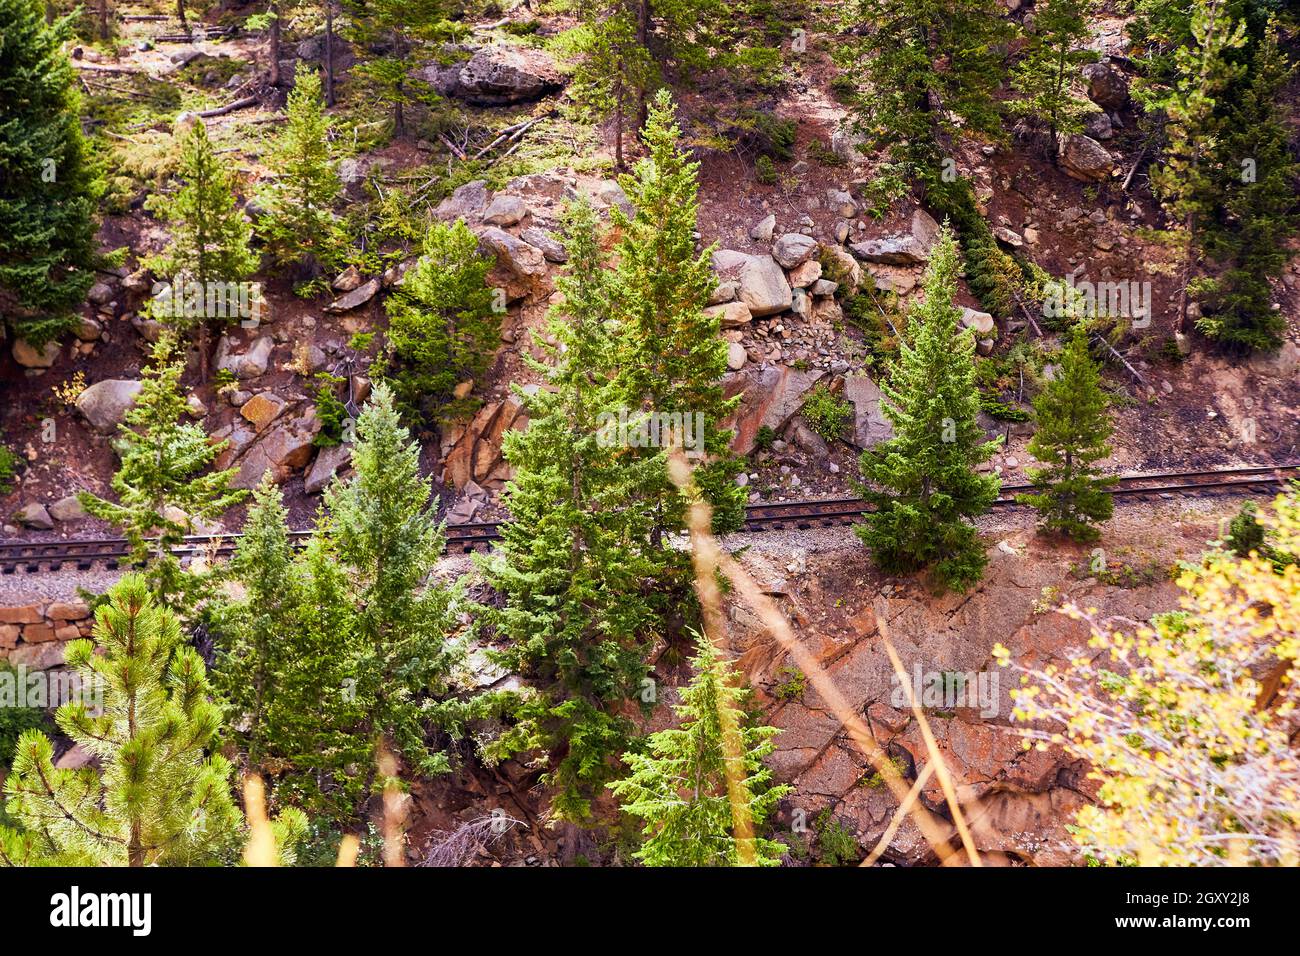 Train track through rocky mountain slop with scattered pine trees Stock Photo